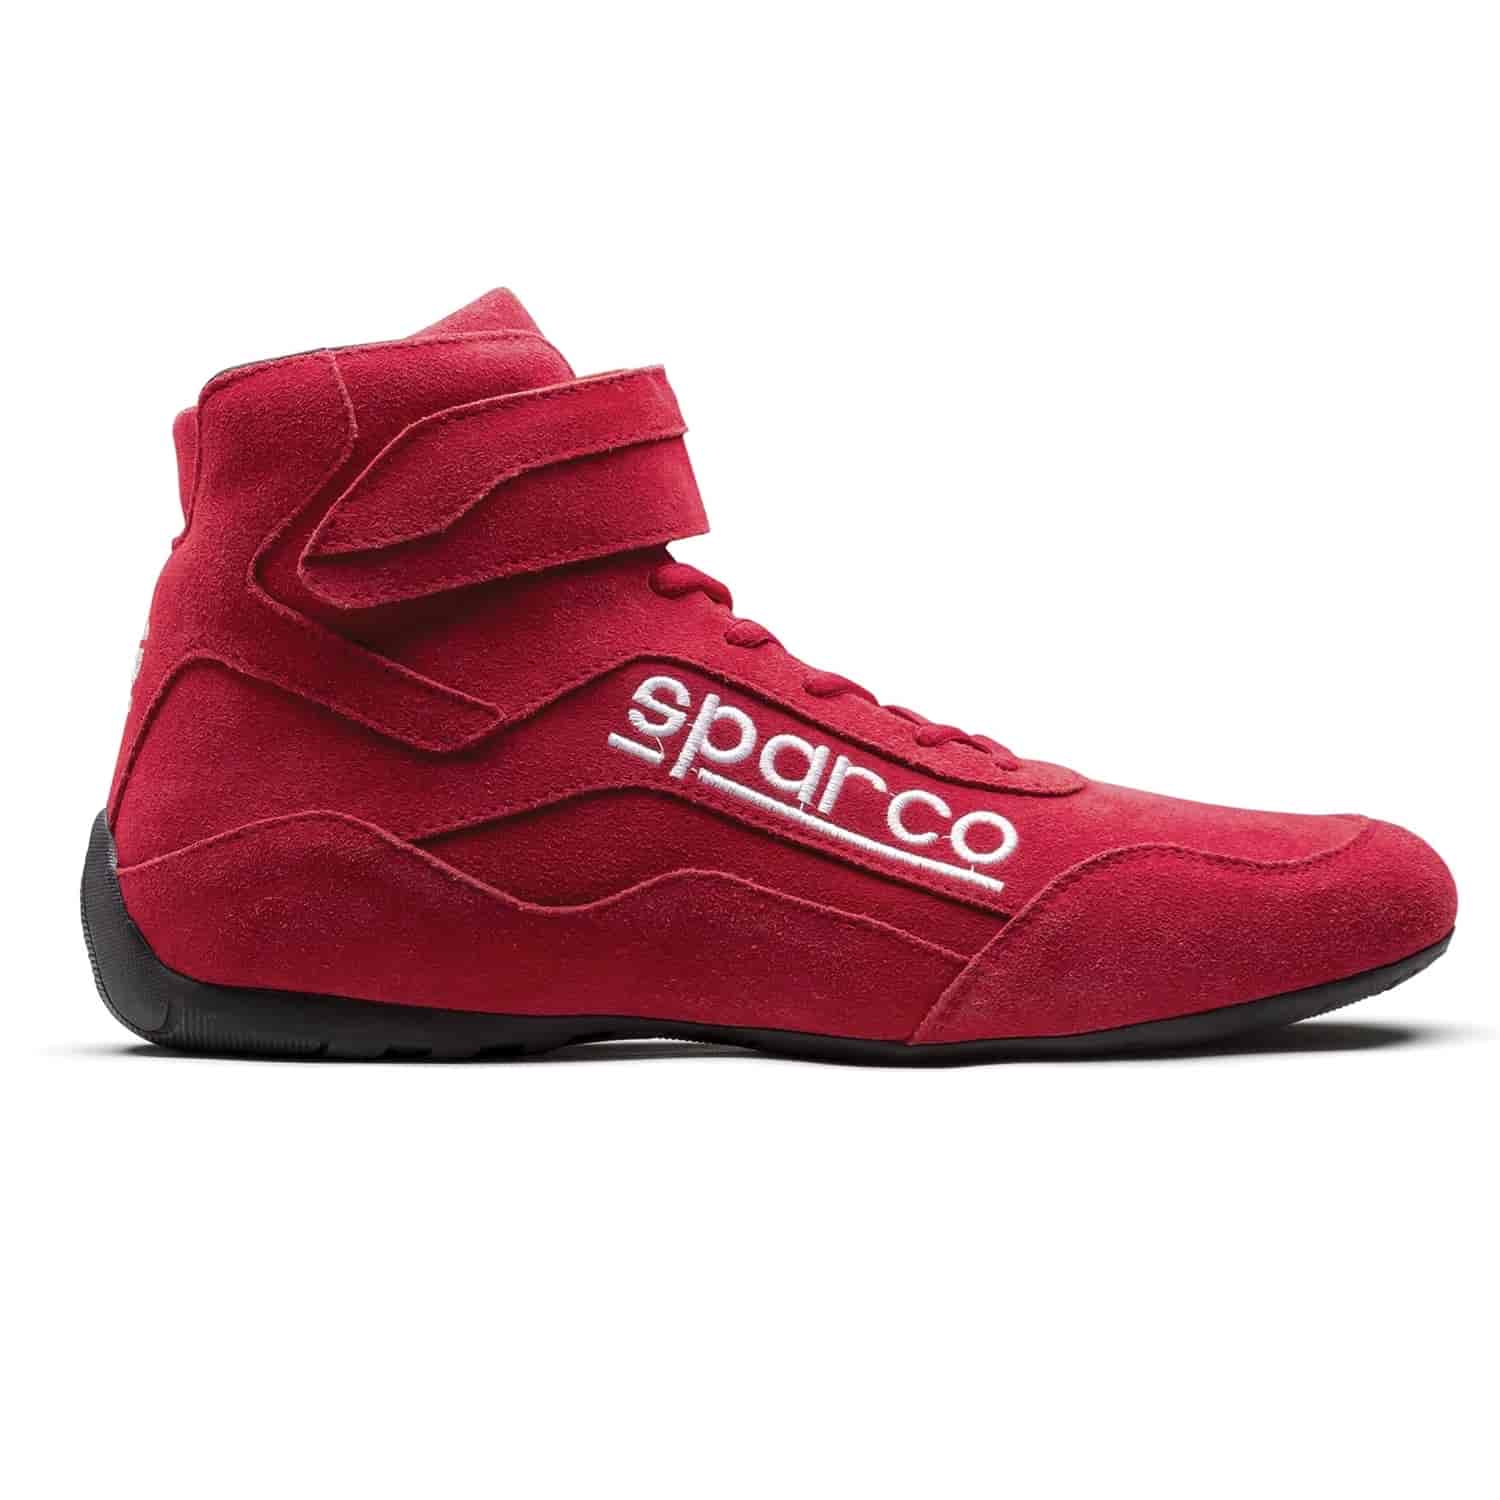 Race 2 Shoe Size 8.5 - Red